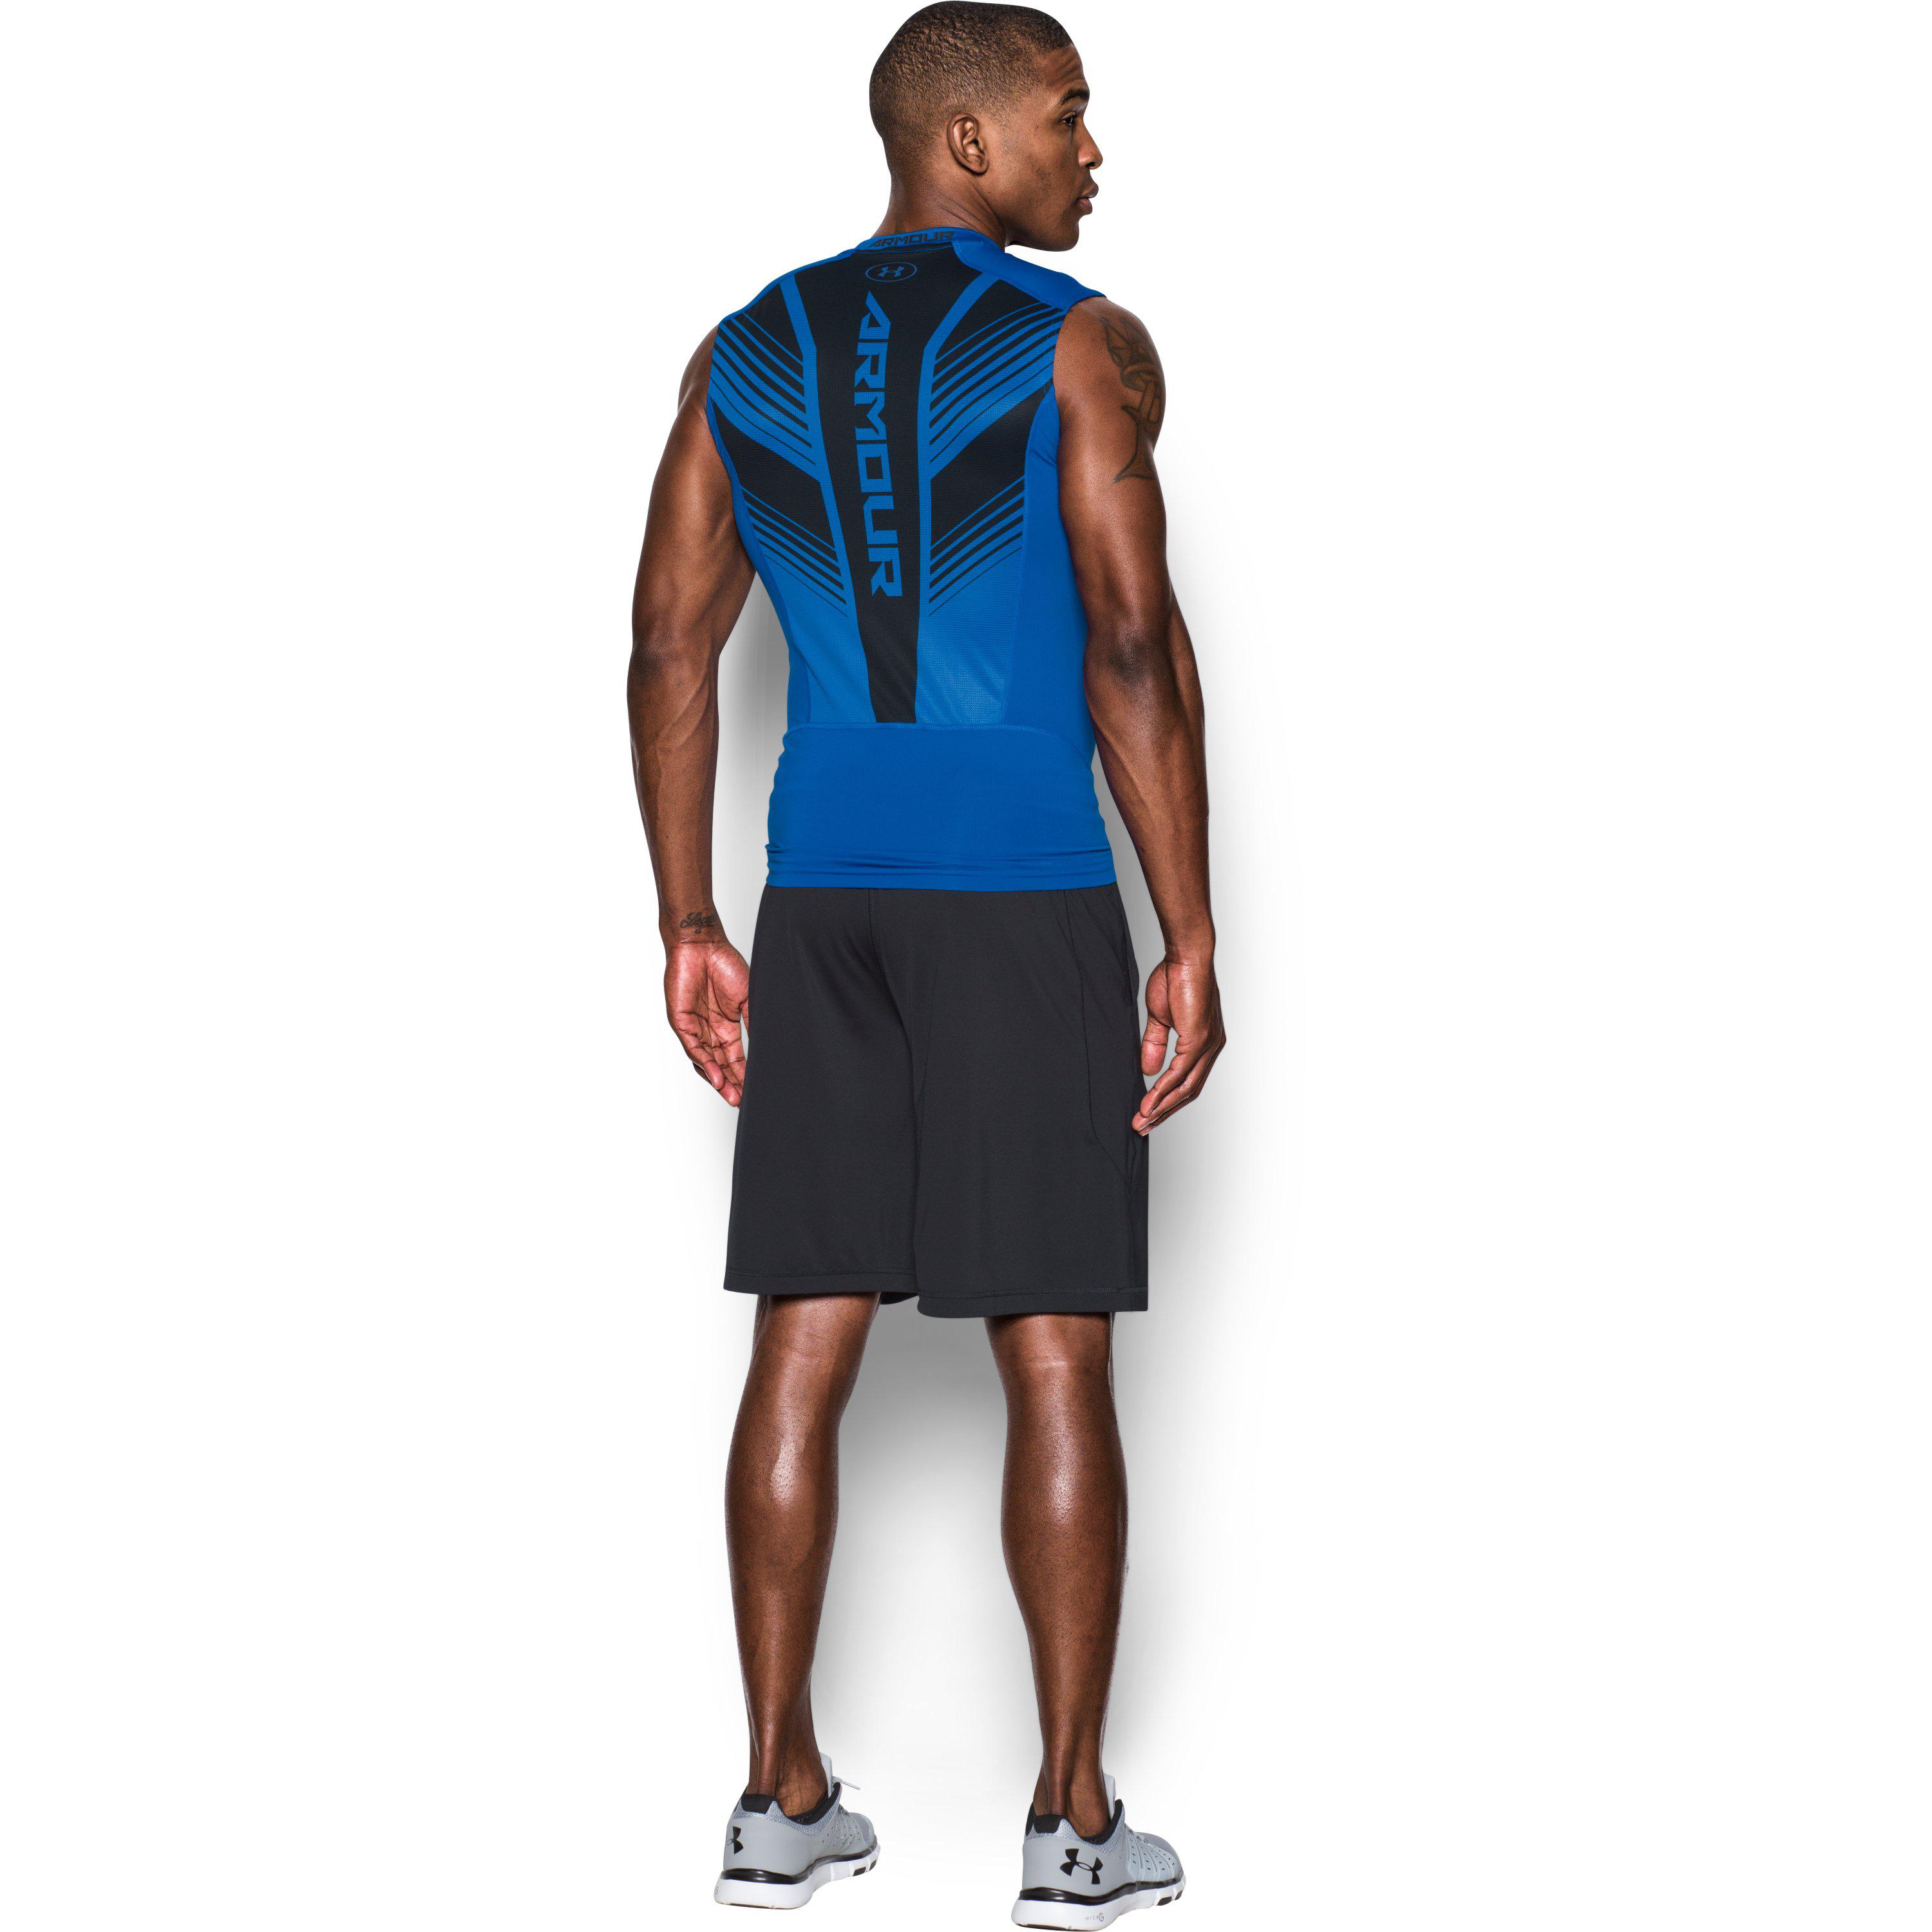 Under Armour Performance Compression Tank - Macy's